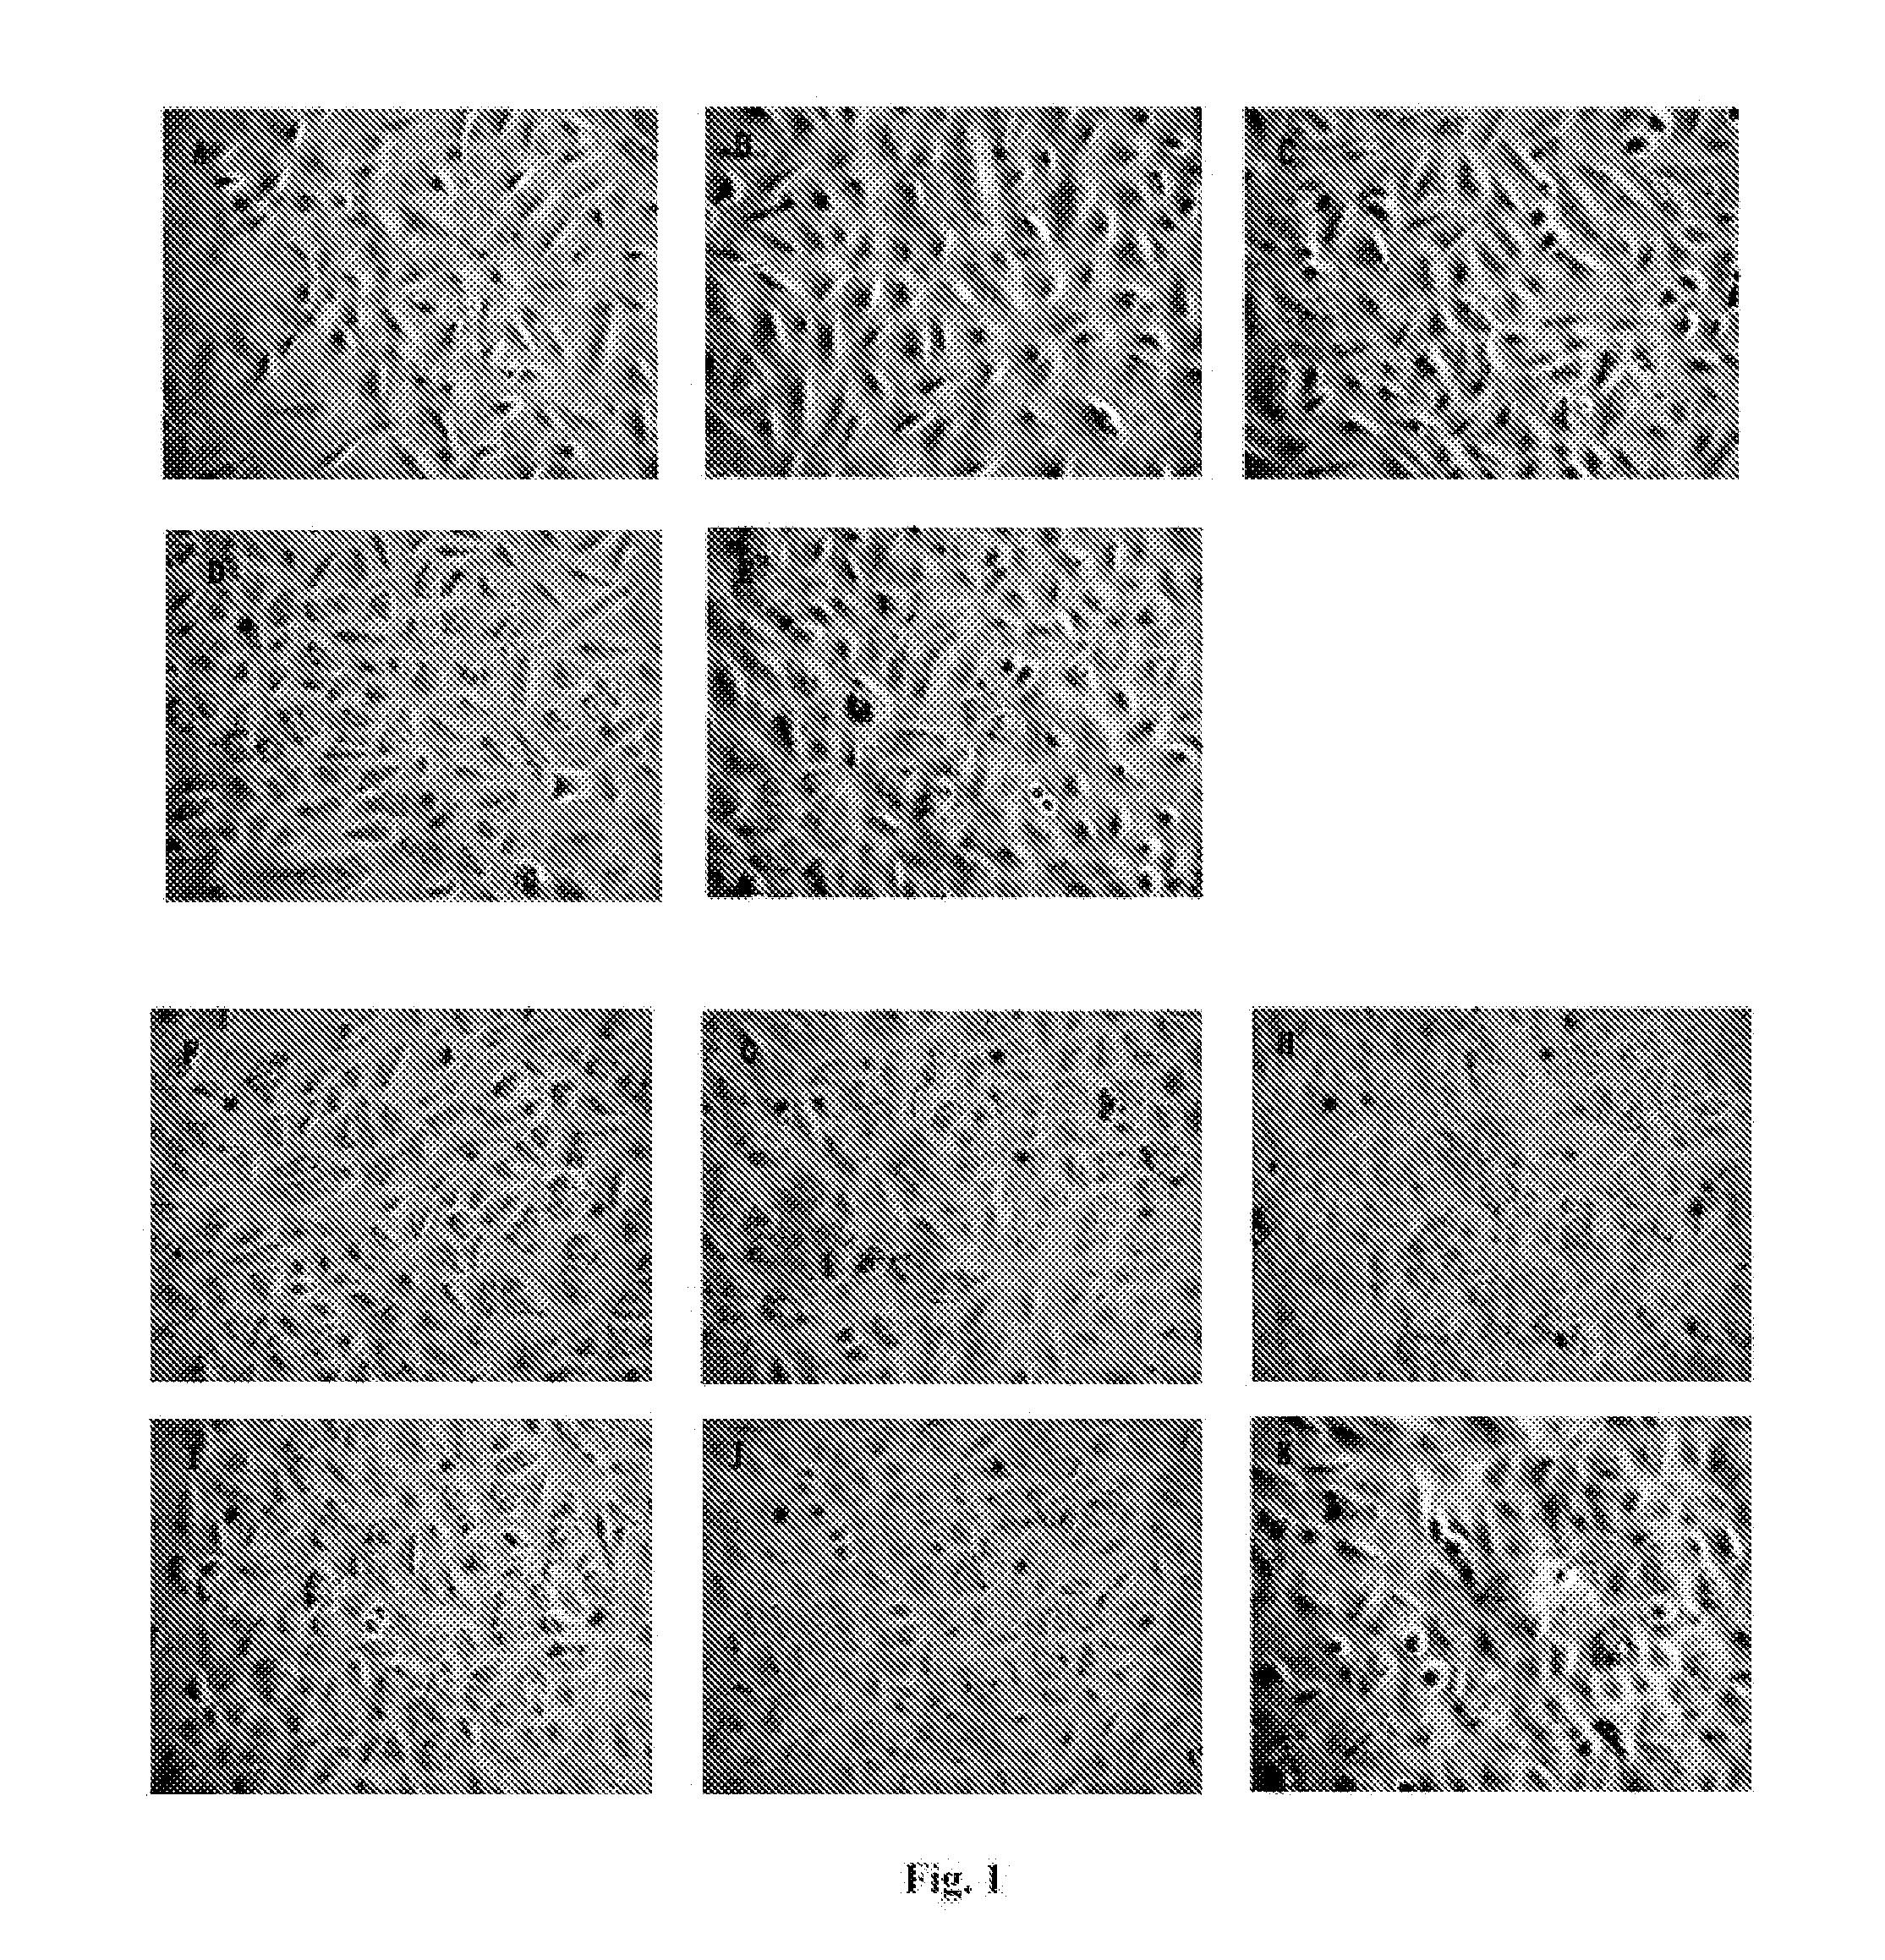 Retinoid Derivative and Pharmaceutical Composition and Use Thereof